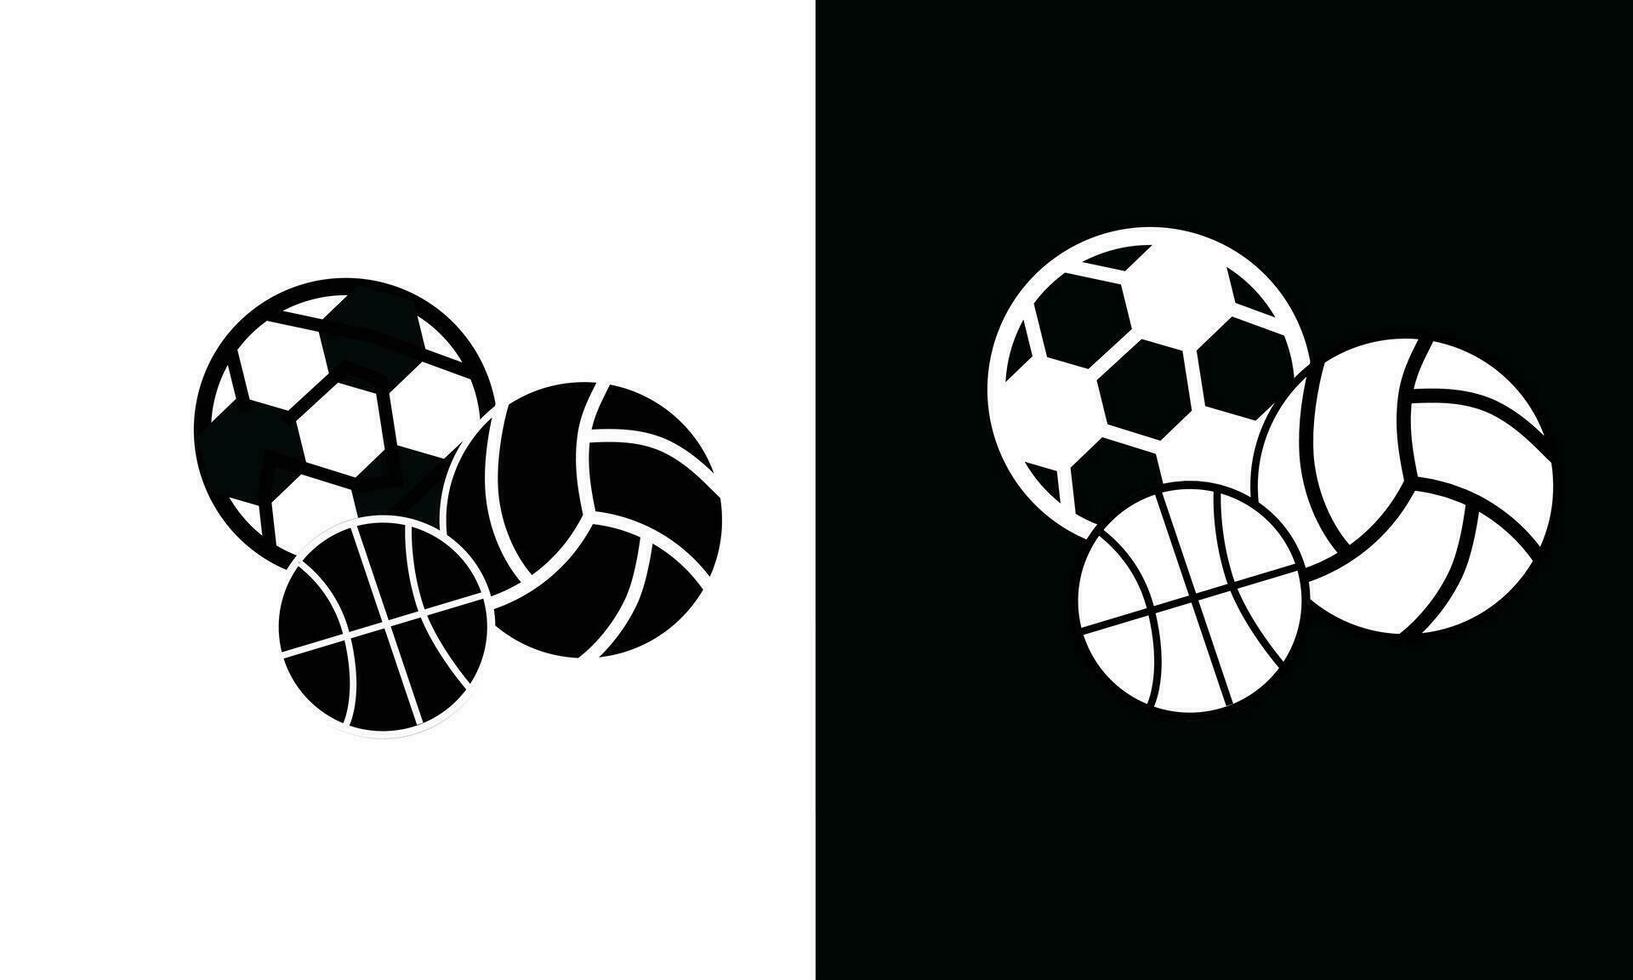 Soccer ball, volley ball, tennis ball, basket ball icon vector set in silhouette style.School supplies icon vector. Back to school concept. Learning and education icon. Flat vector in black and white.